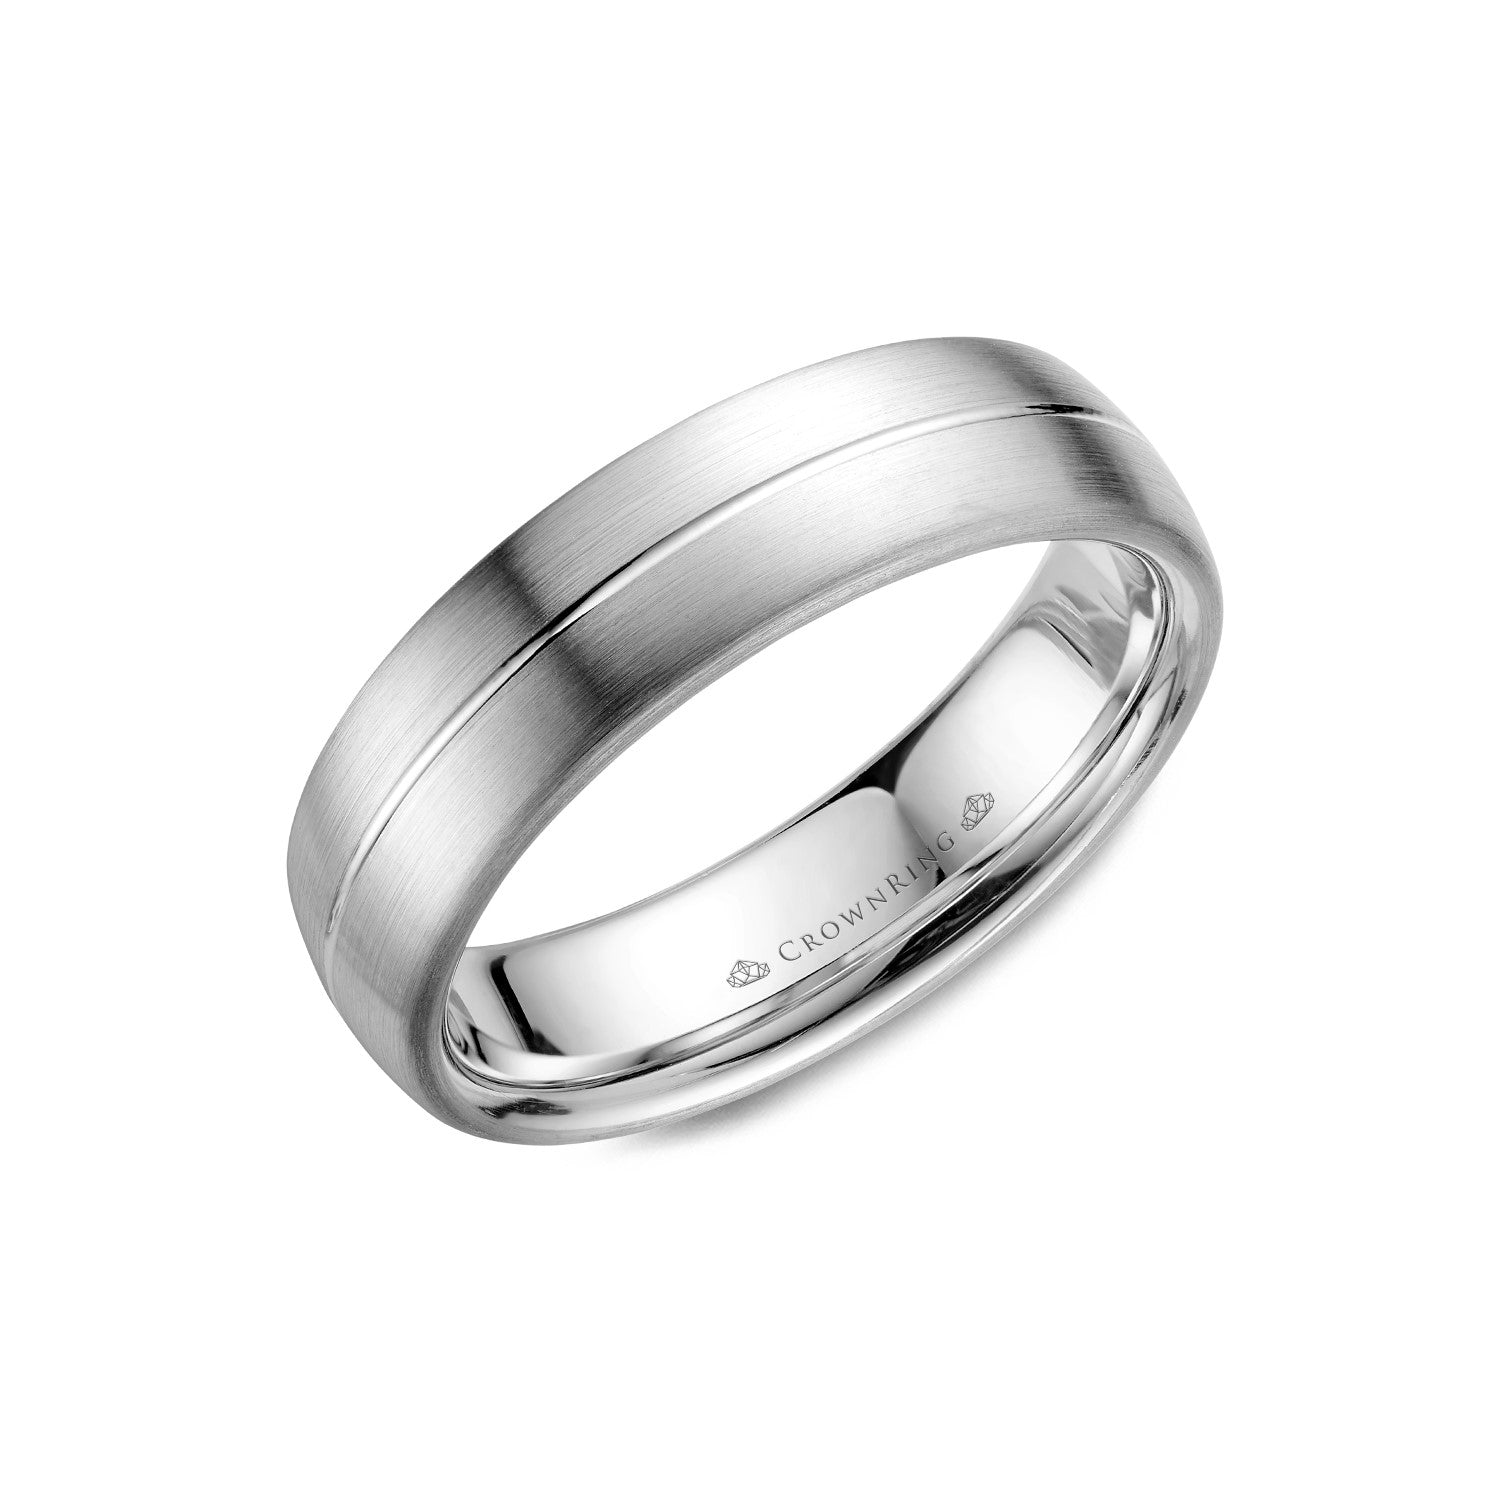 6mm Classic Wedding Band With Sandpaper Finish & High Polish Center Groove